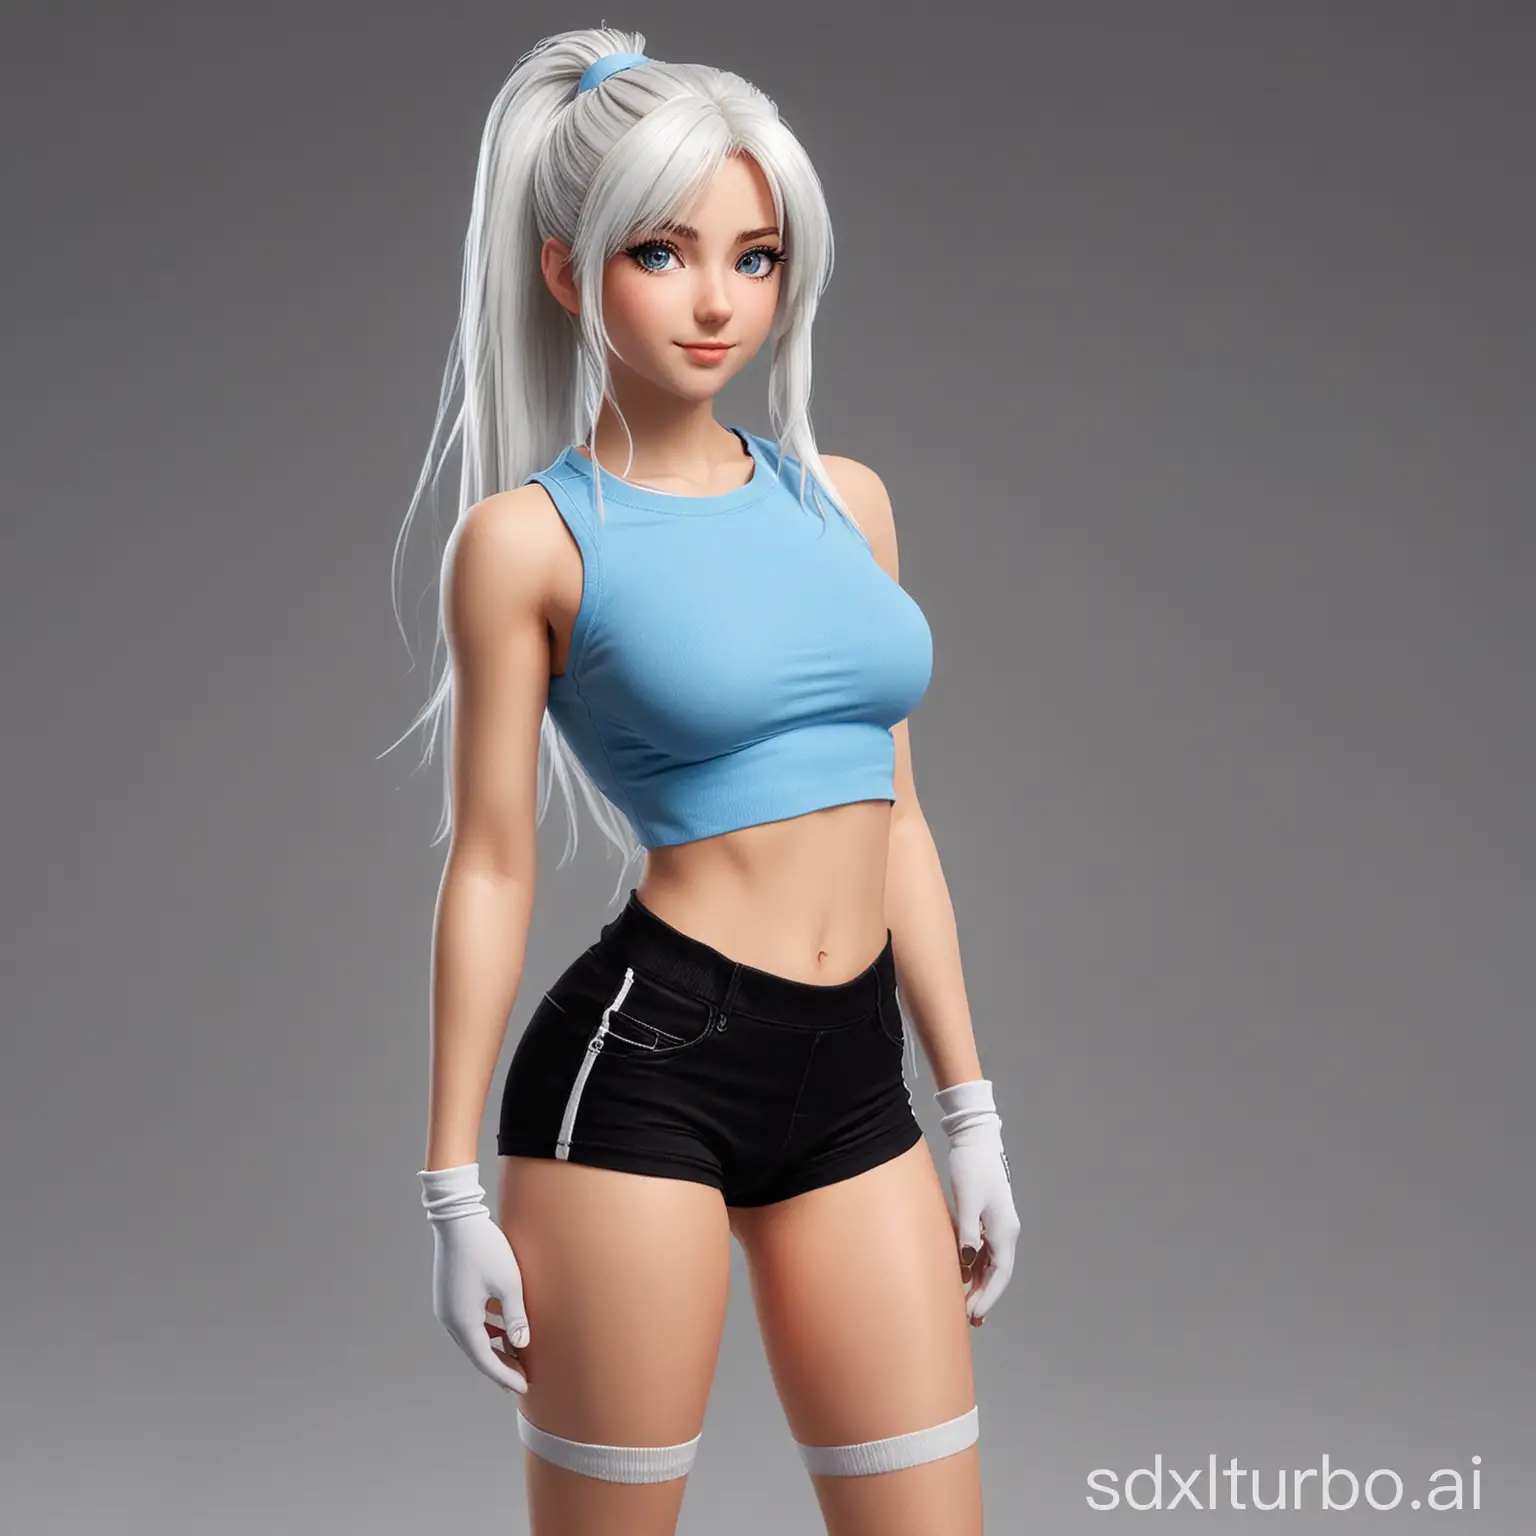 Anime-Girl-with-EuropeanInspired-Features-Long-White-Hair-Blue-Eyes-and-Sporty-Attire